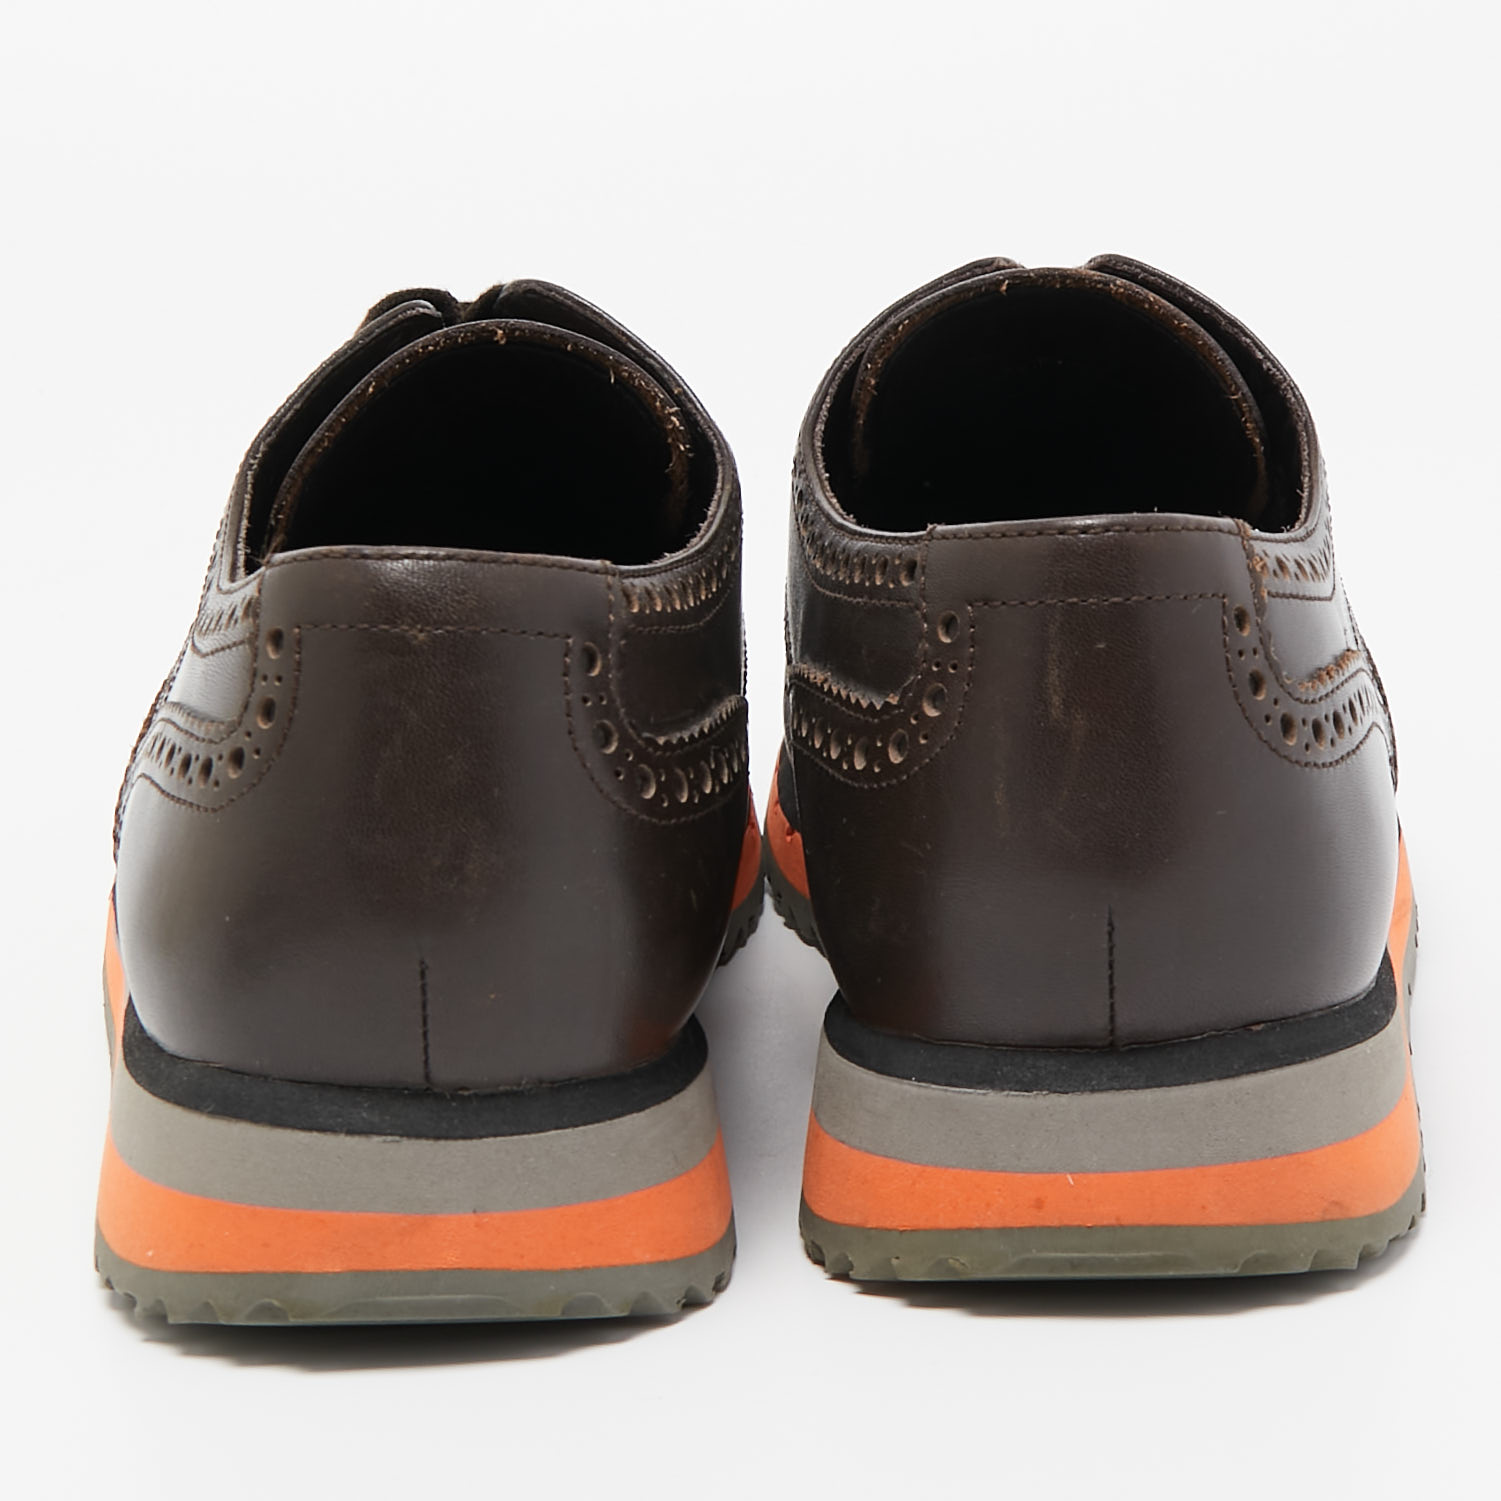 Prada Sport Brown Brogue Leather Derby Sneakers Size 42.5